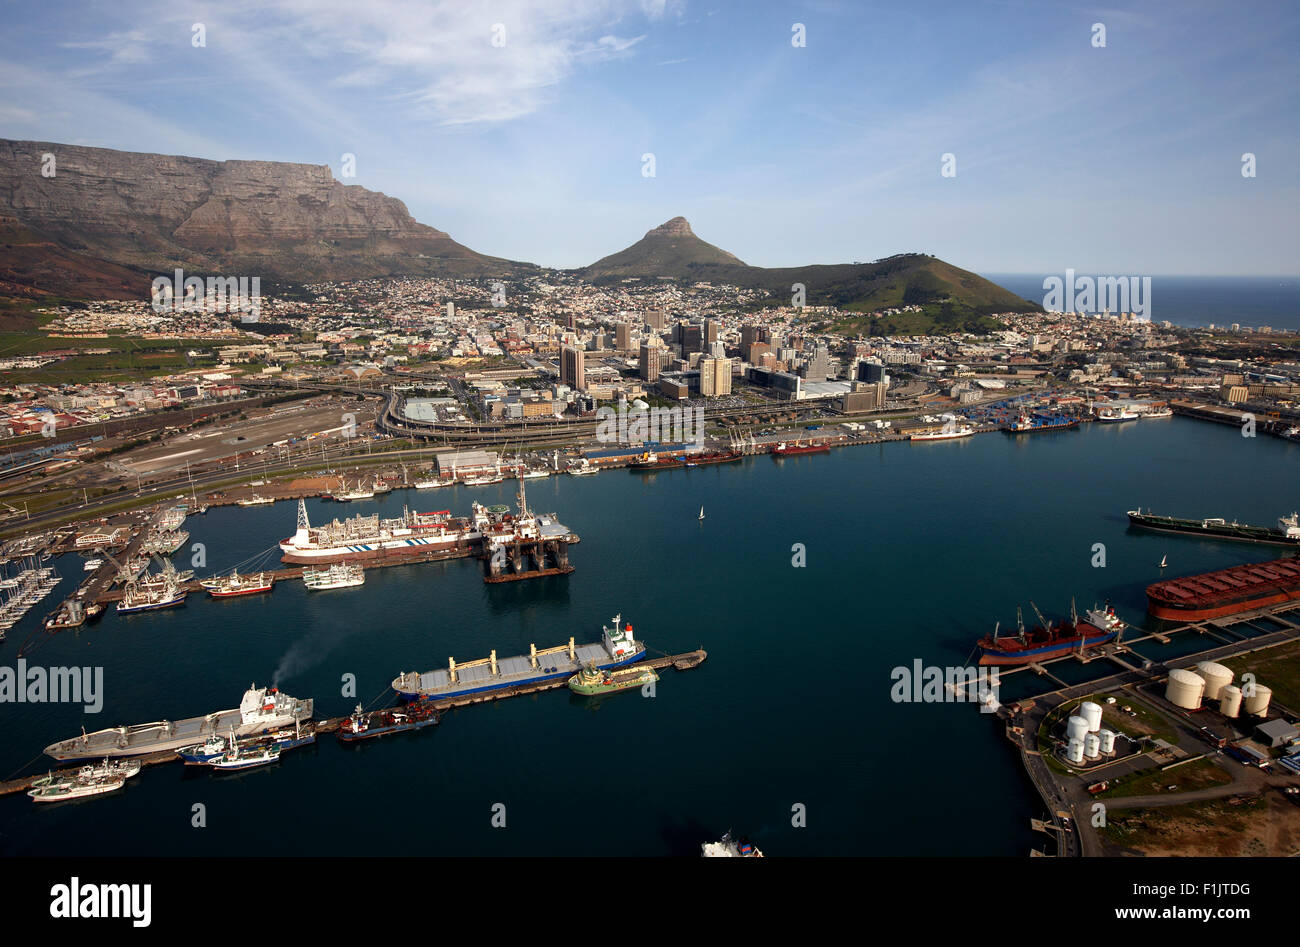 Aerial view of Cape Town's Roads and harbour Stock Photo